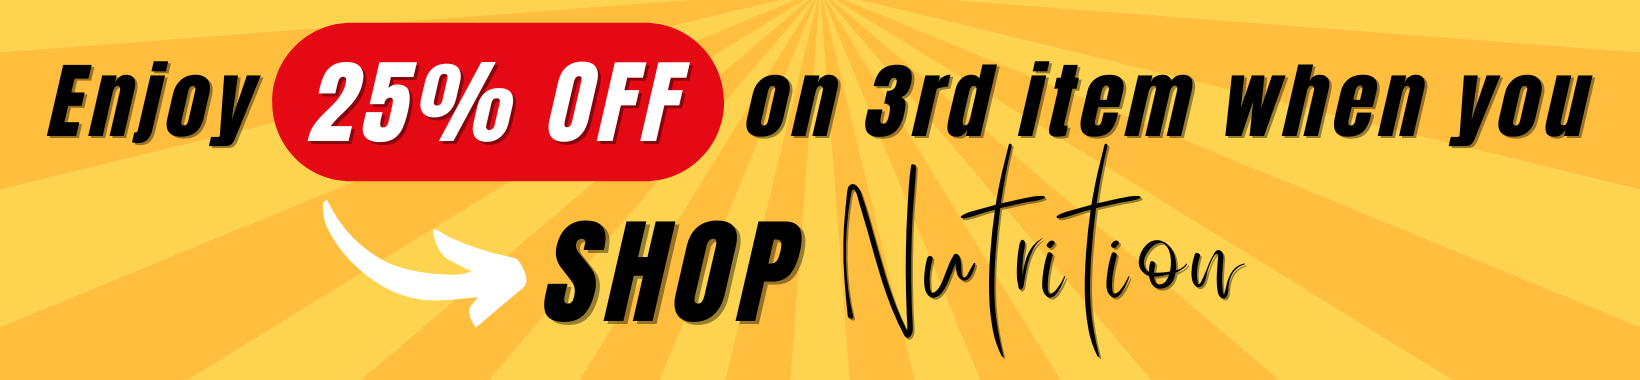 Enjoy 25% OFF your 3rd item when you Shop Nutrition